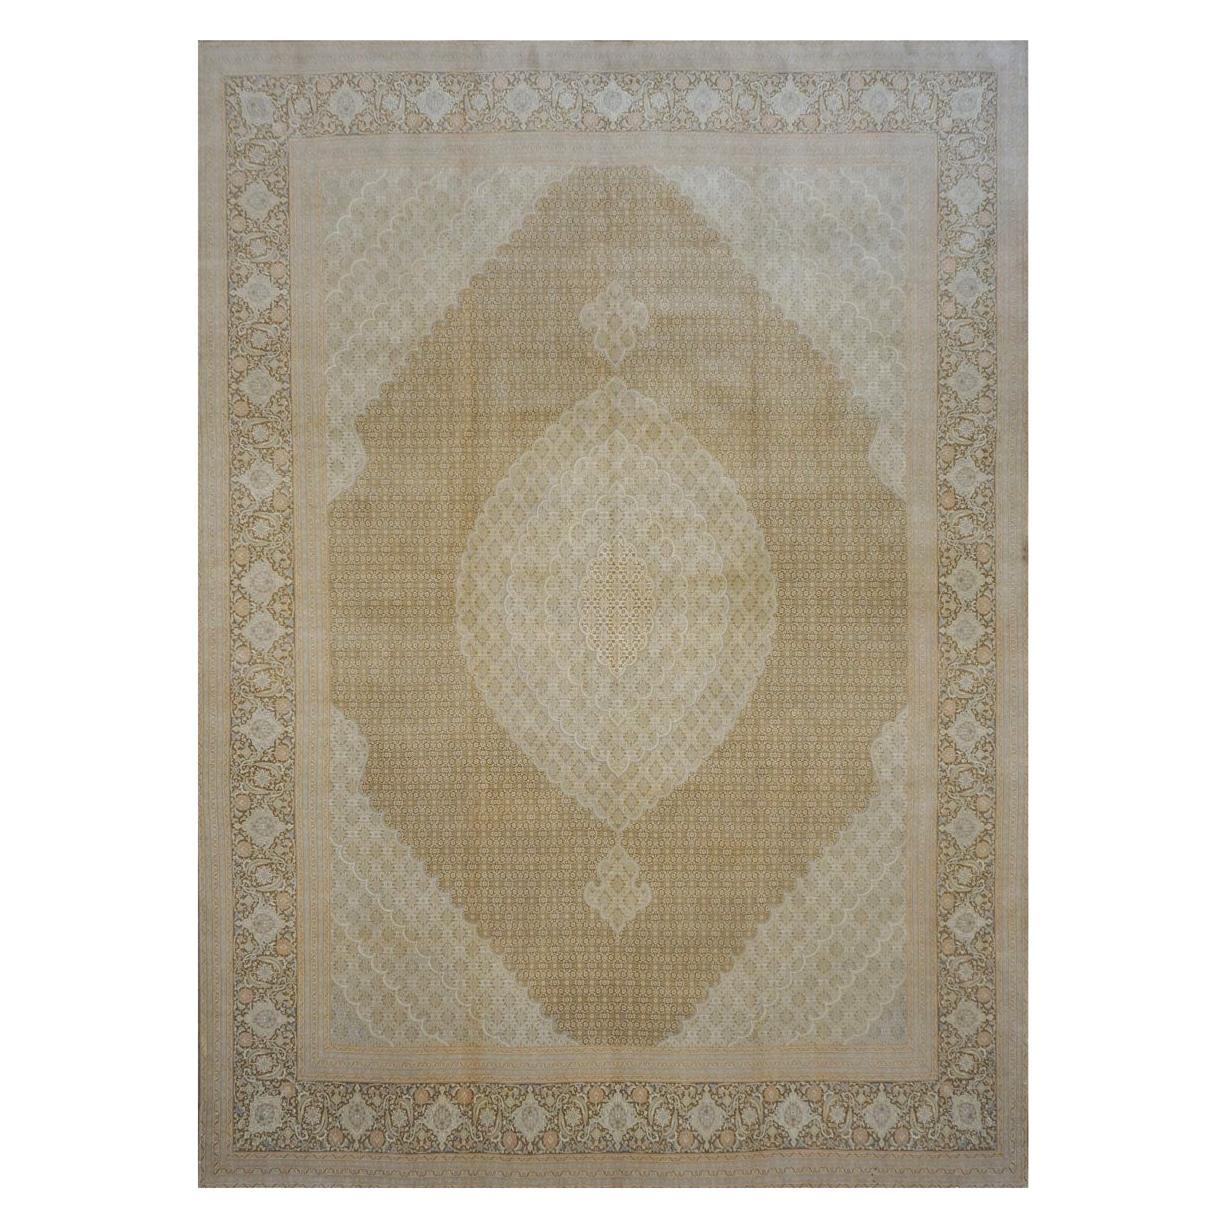 Antique 1940s Persian Tabriz 10x14 Ivory, Brown, & Tan Handmade Area Rug For Sale